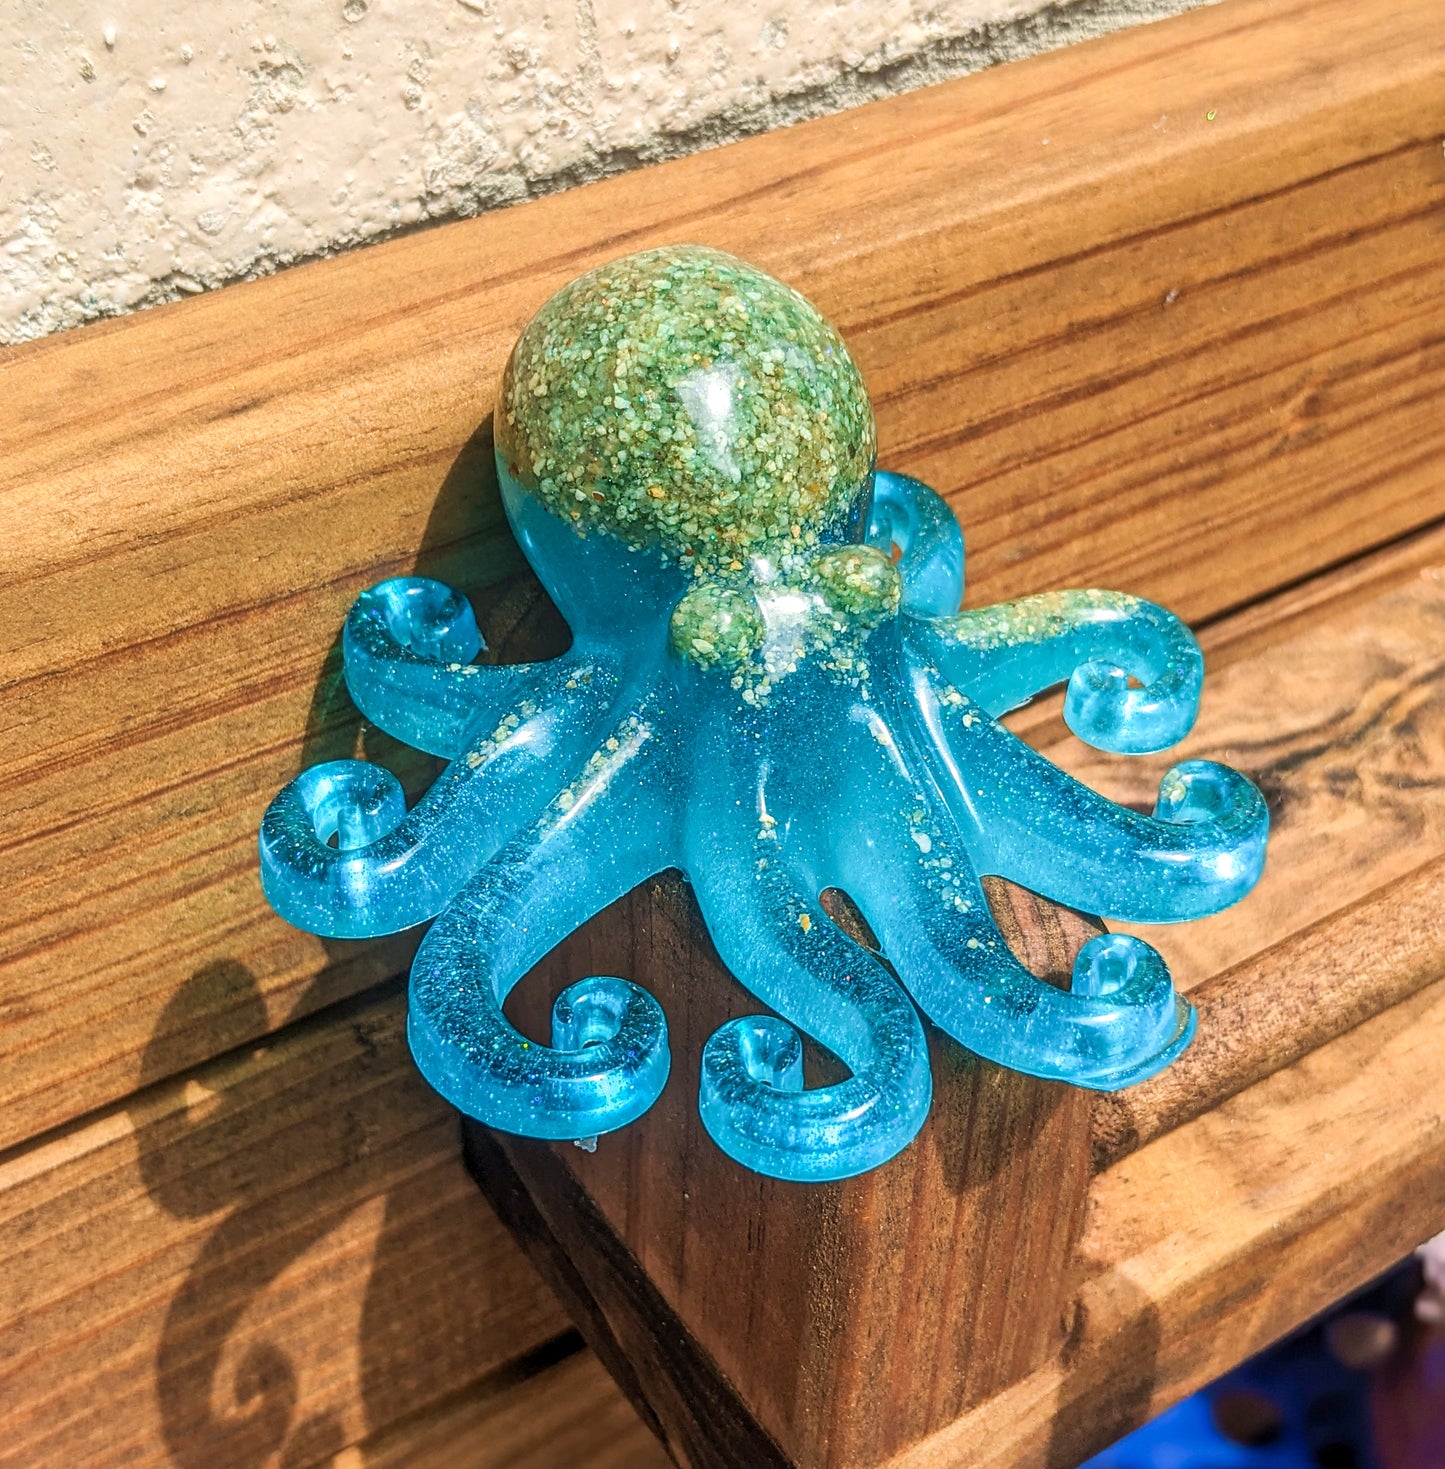 Ocean Octo (only 1 available)